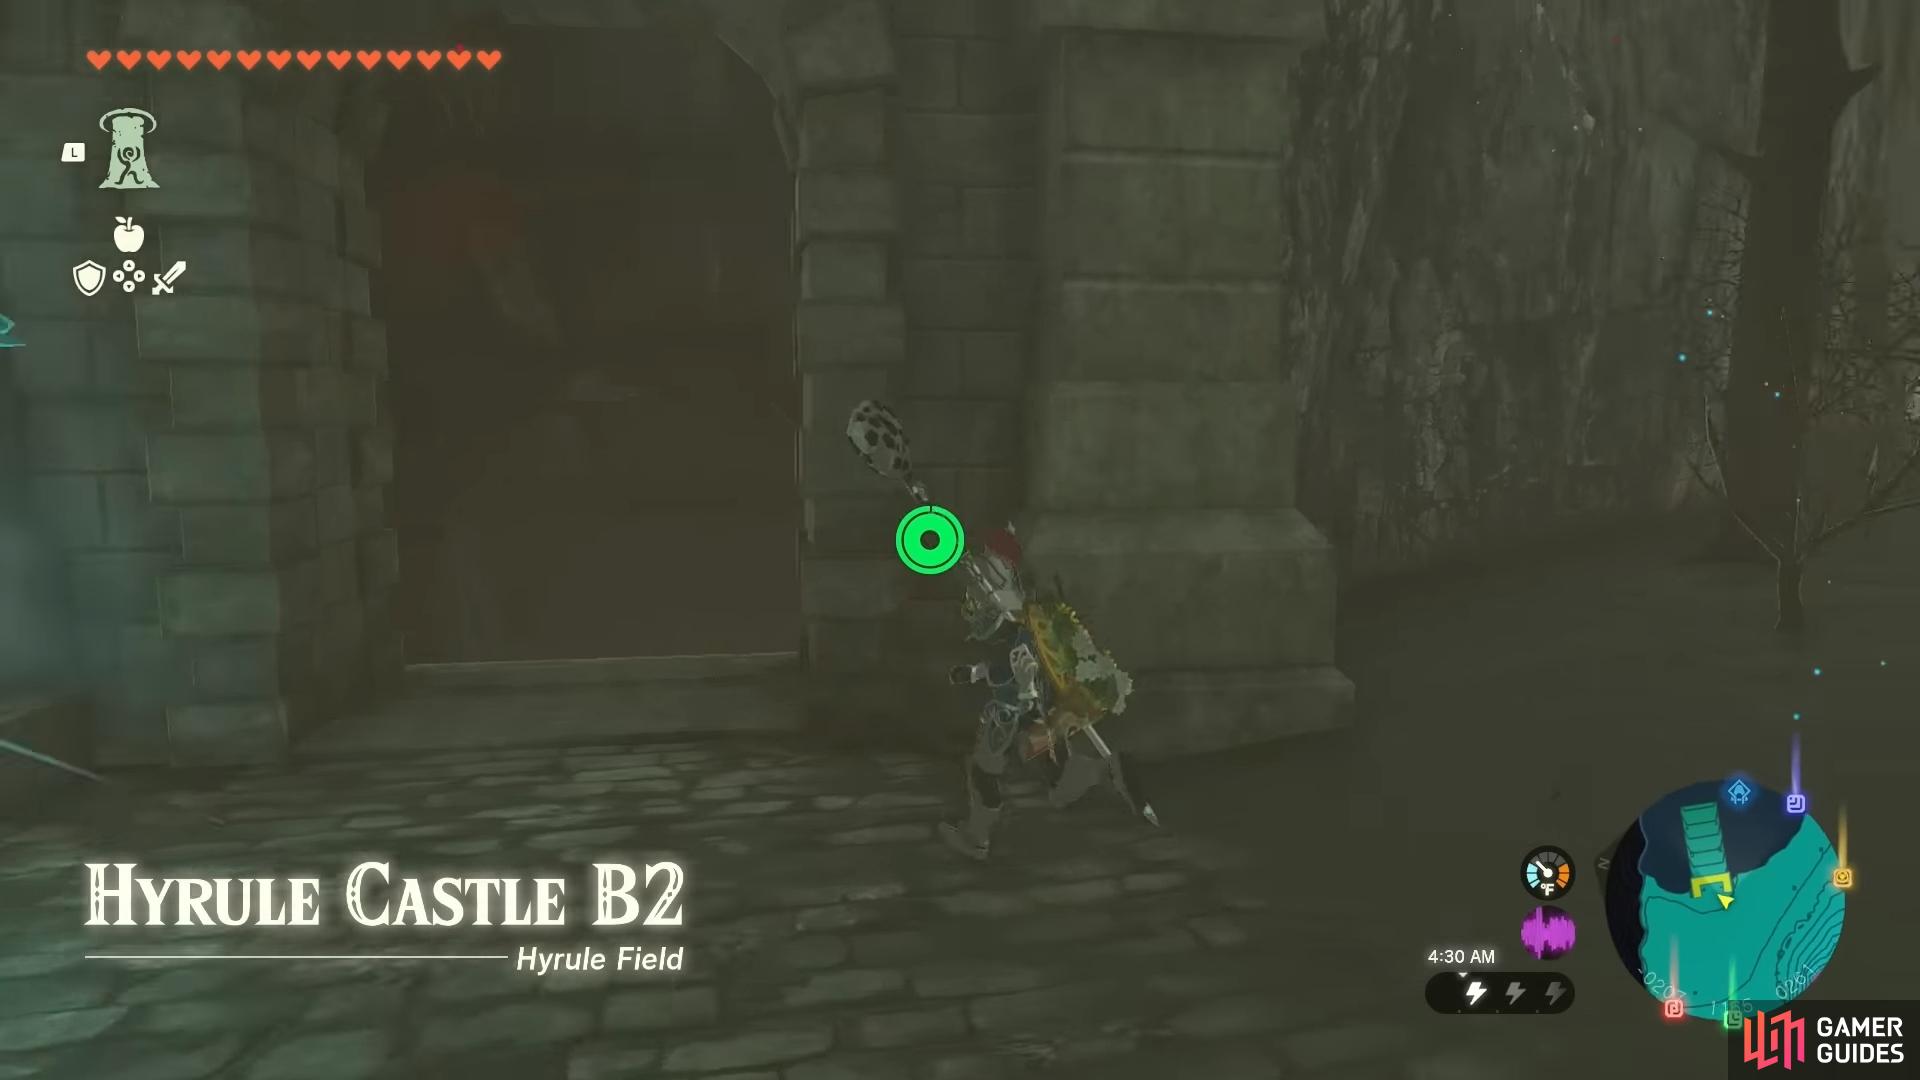 The Hyrule Castle Library entrance point